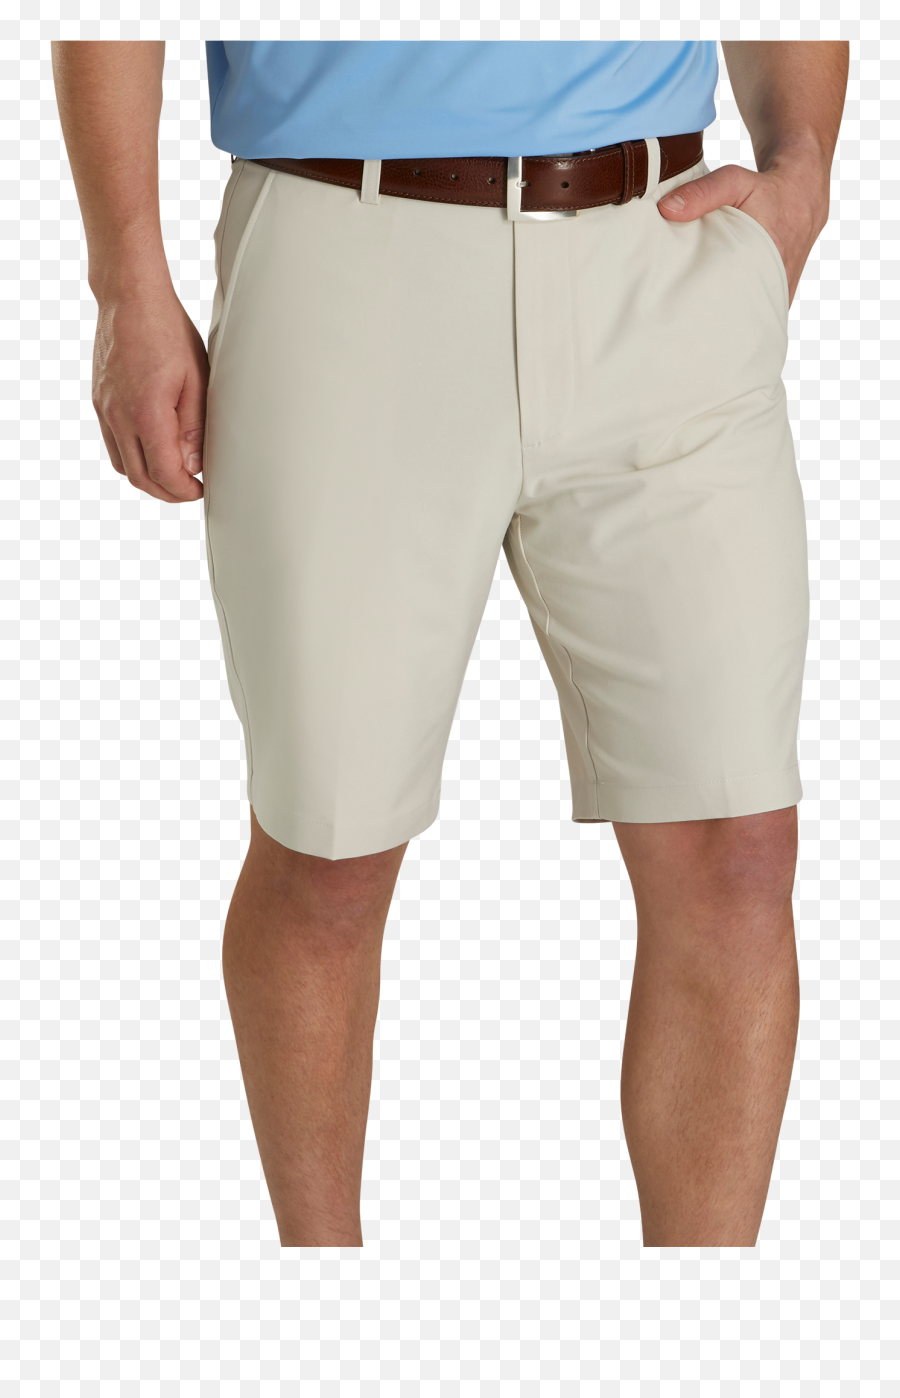 Golf Shorts For Men - Solid Emoji,Emotions While Inseams